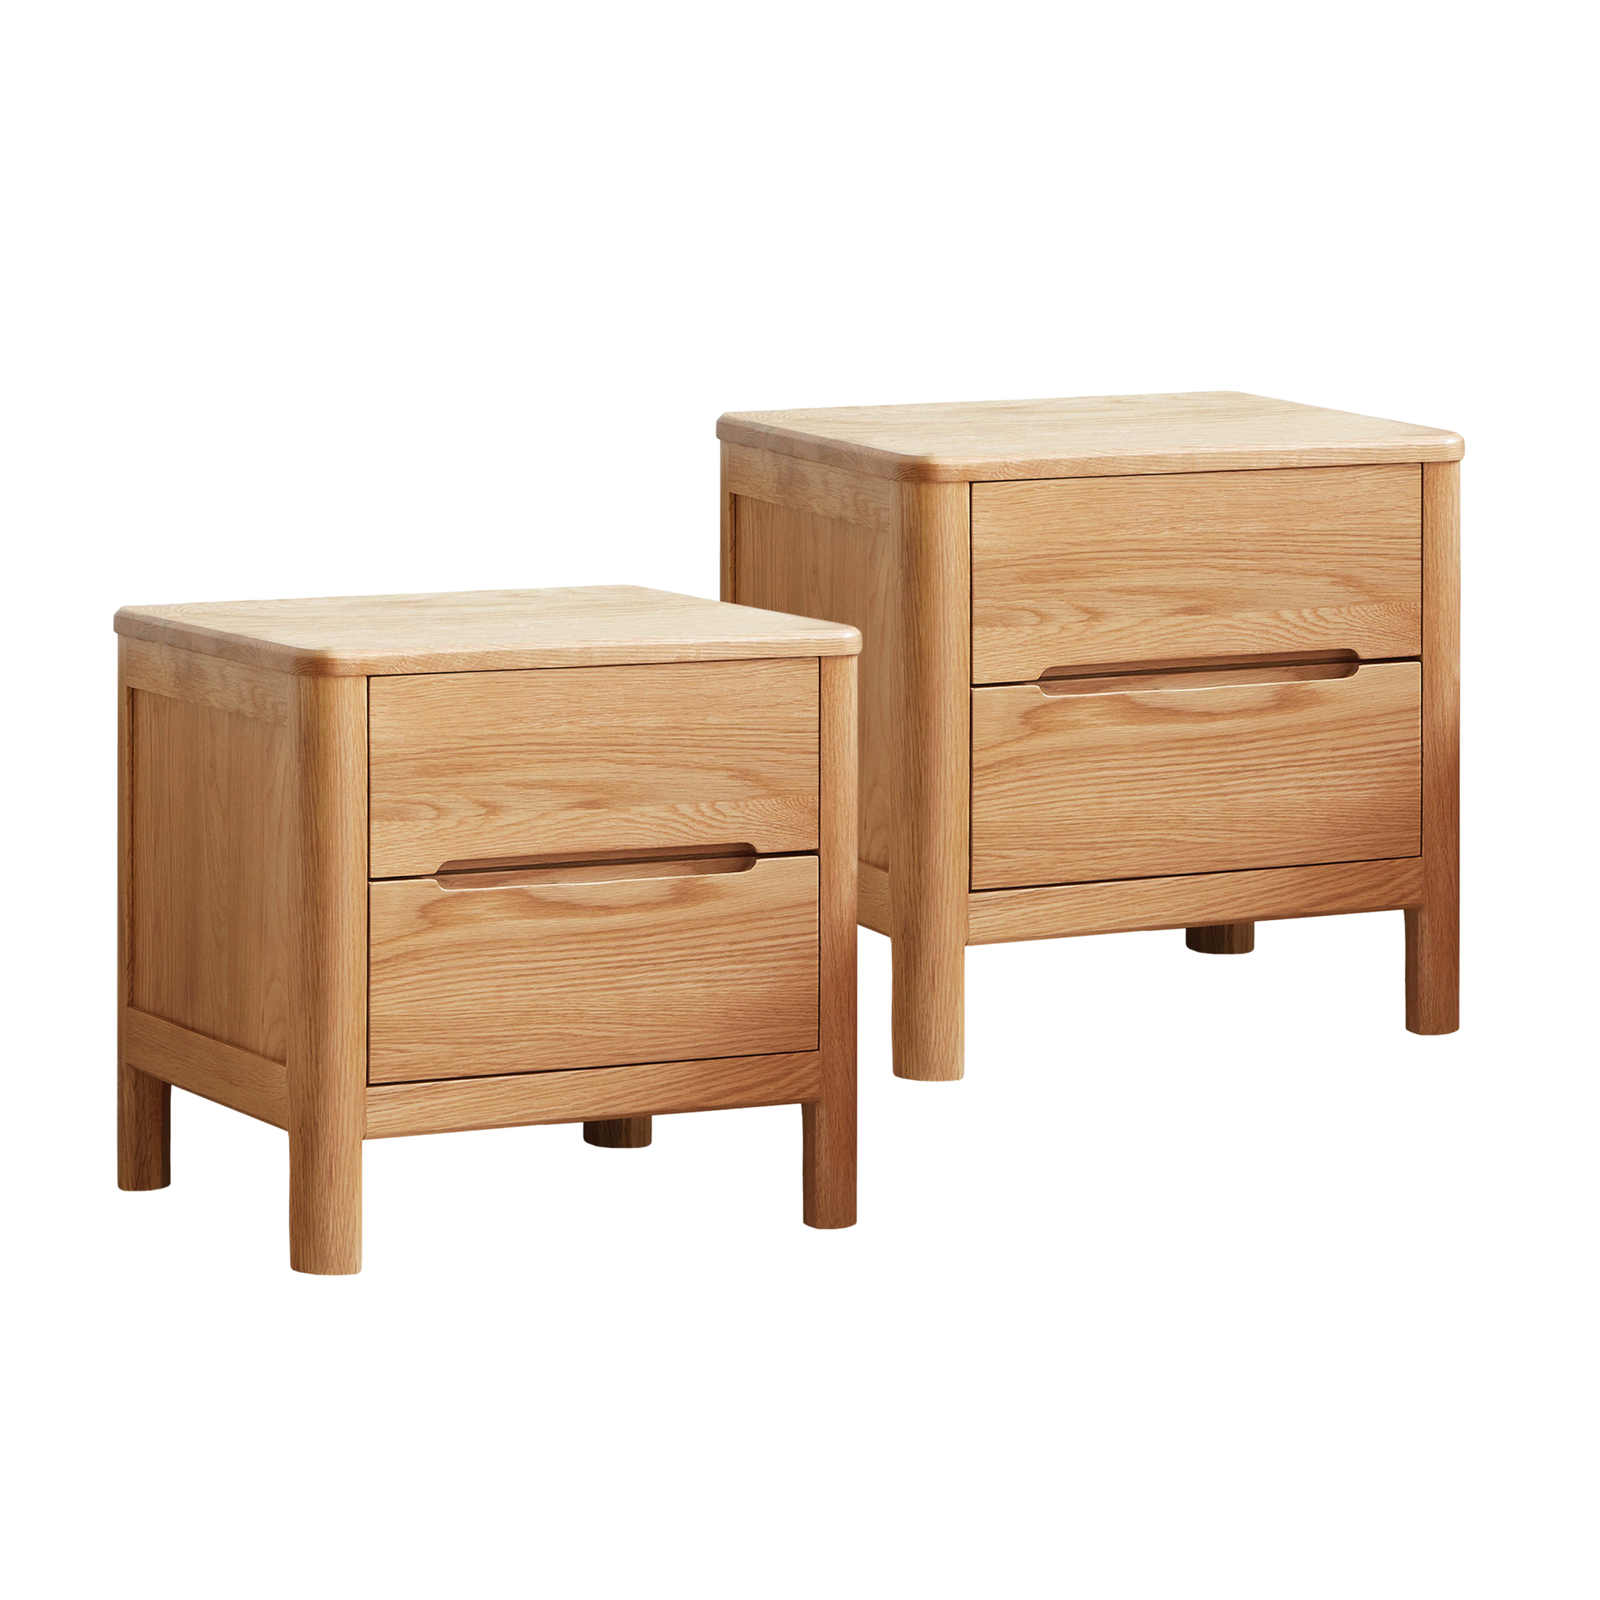 MIUZ 2x Bedside Table Bed Side Tables Drawers Side Tables Solid Timber American Oak Wood Nightstand